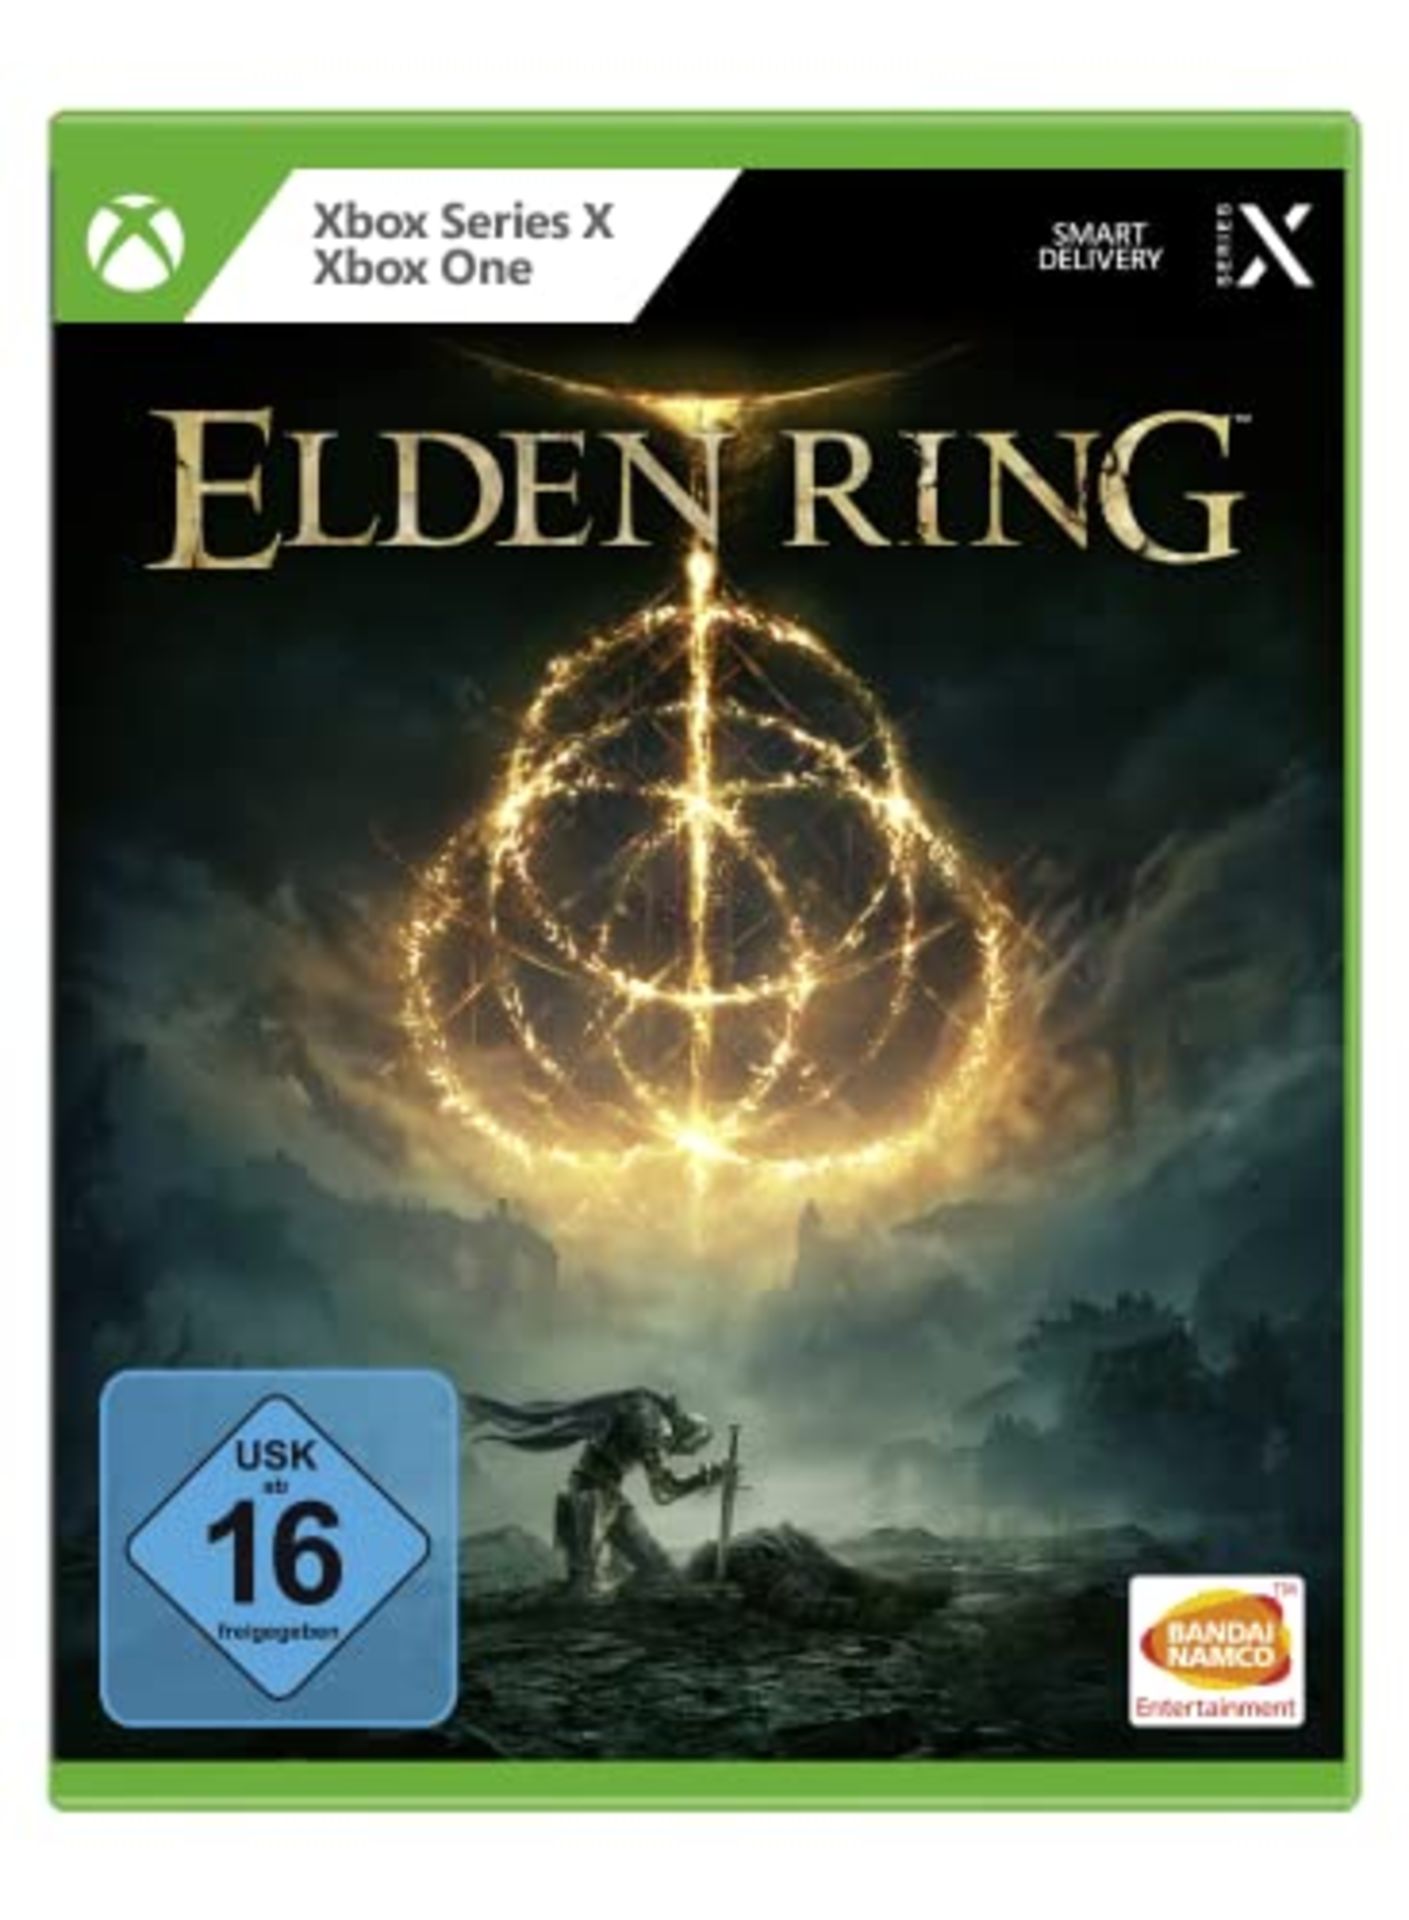 ELDEN RING - Standard Edition [Xbox One] | Free upgrade to Xbox Series X